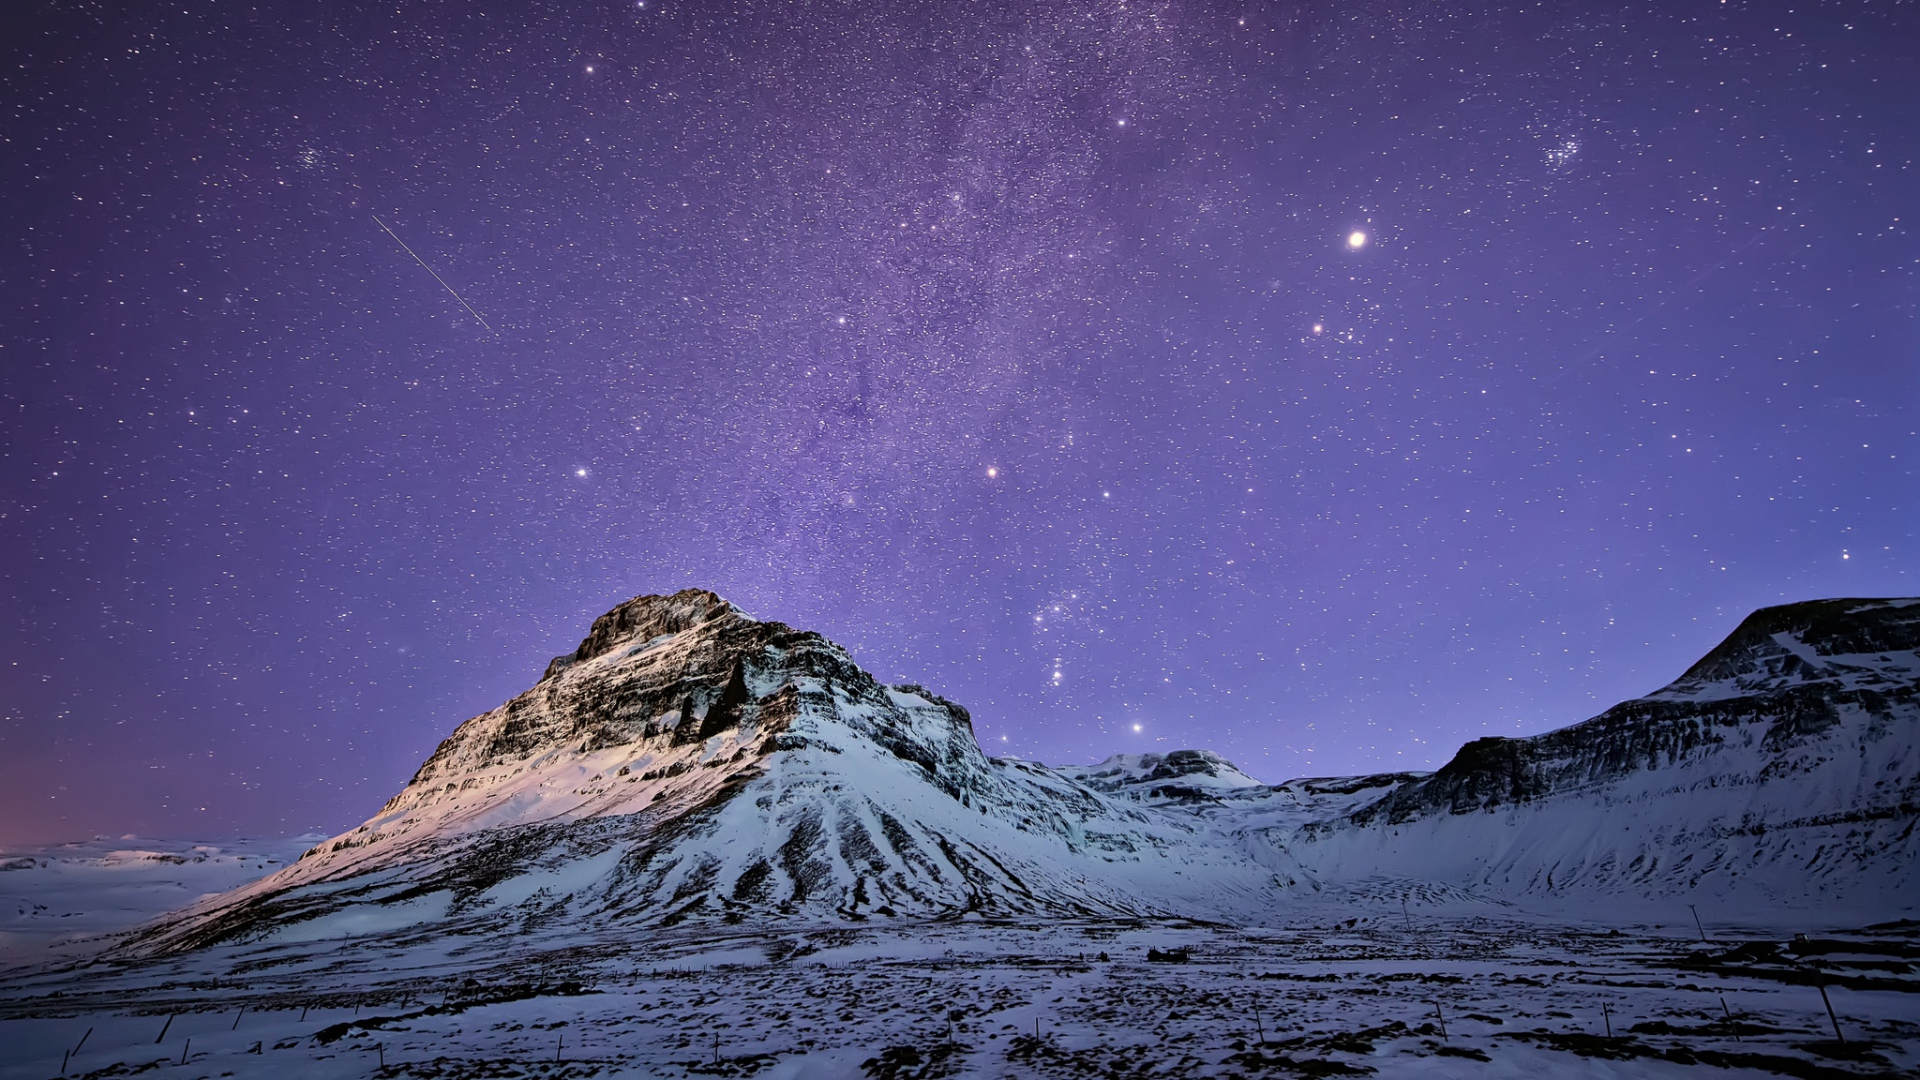 Wallpaper Iceland Mountains Snow Night Lilac Sky Stars